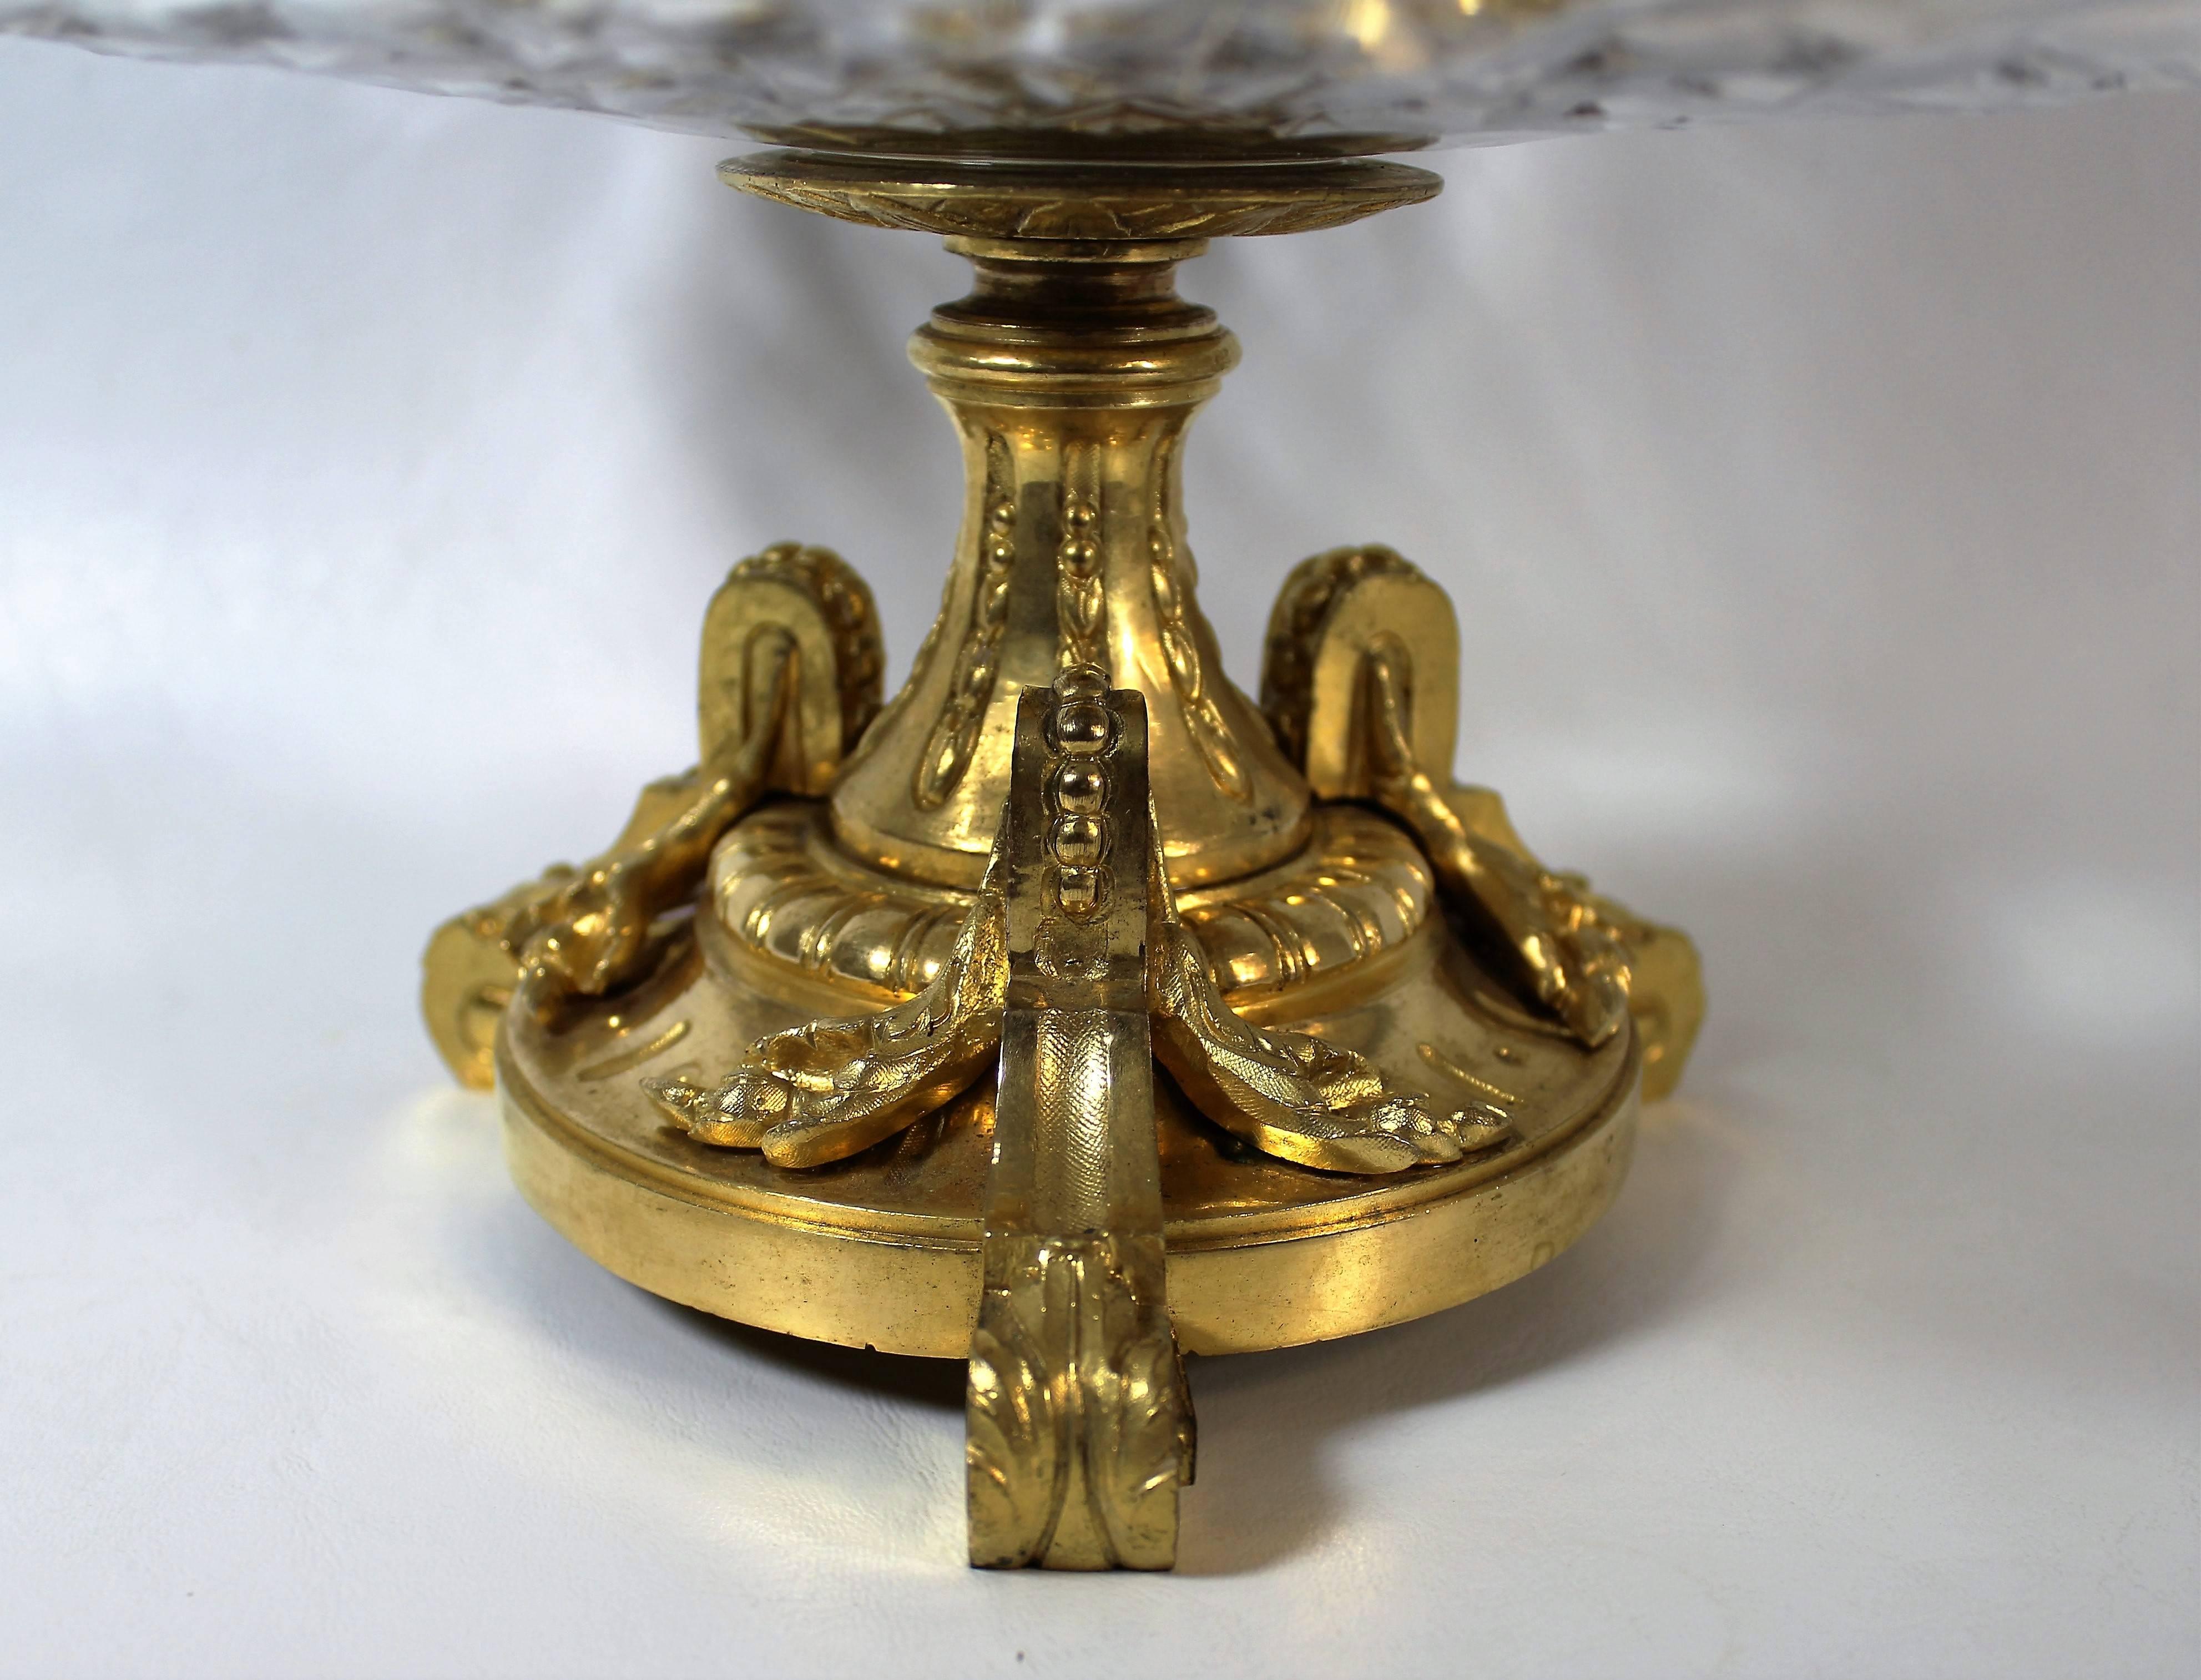 Neoclassical Revival French Gilt Bronze & Cut Crystal Two-Tier Surtout De Table or Centerpiece Tazza For Sale